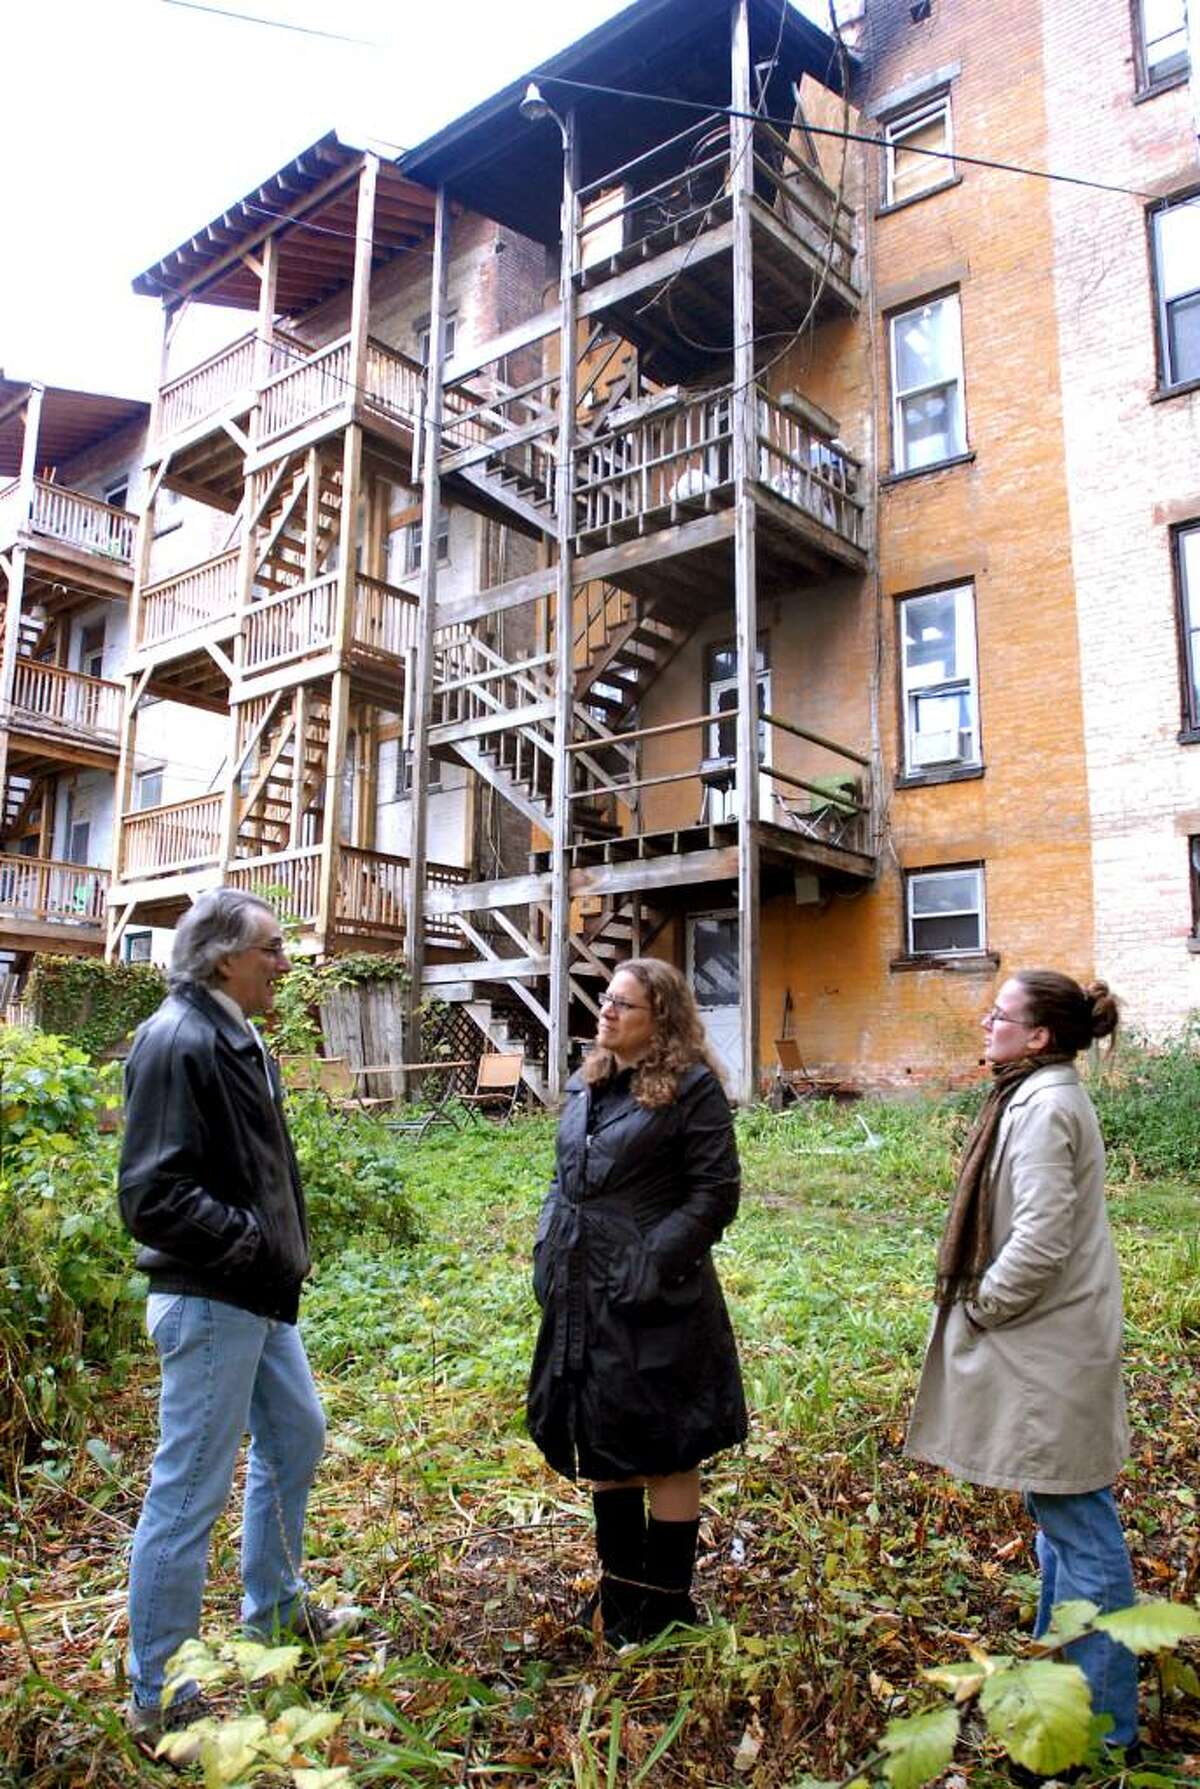 Building owner Joseph Galu, left, talks with Susan Holland, center, and Cara Macri, right, both of the Historic Albany Foundation, as they evaluate the backside of 582 Madison Ave. after it was damaged by a fire Monday night in Albany. (Cindy Schultz / Times Union)